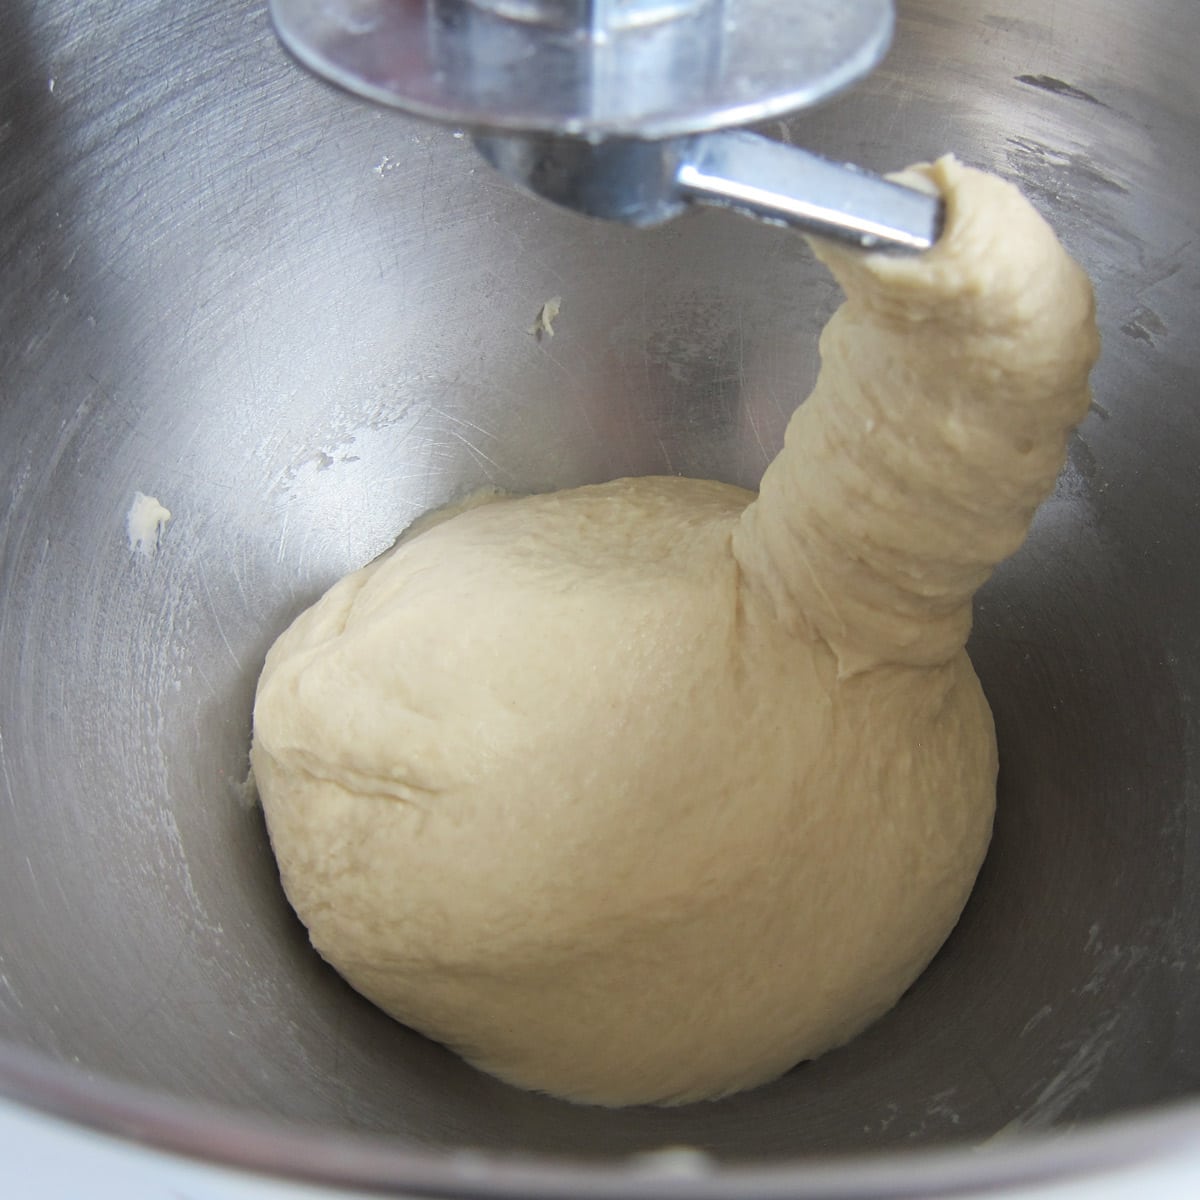 hamburger bun dough kneaded using a stand mixer fitted with a dough hook.